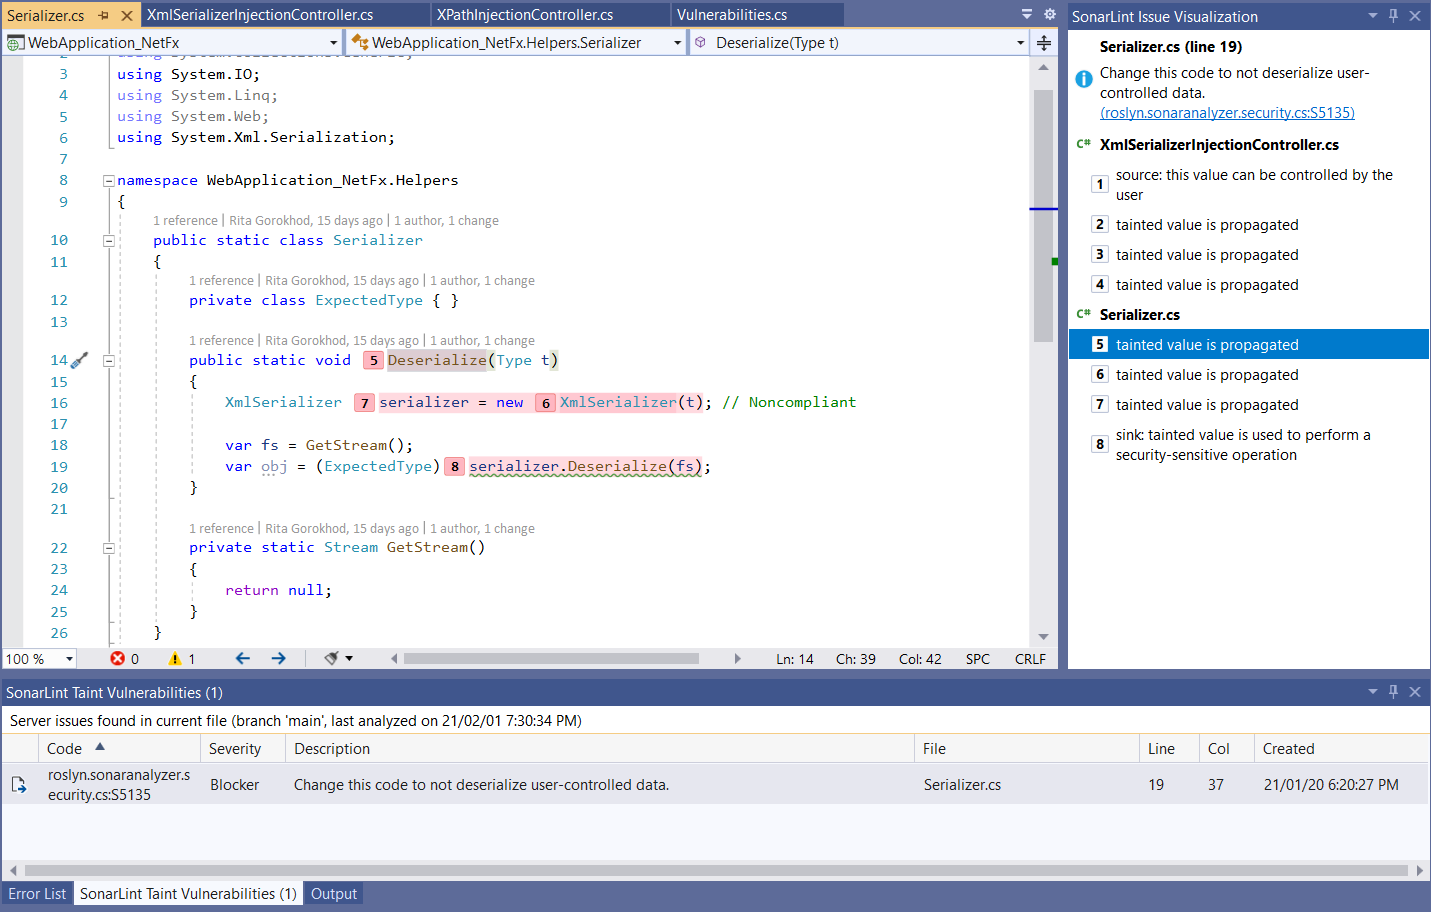 Secondary issue locations found be SonarQube or SonarCloud will be visualized in the Visual Studio code editor.